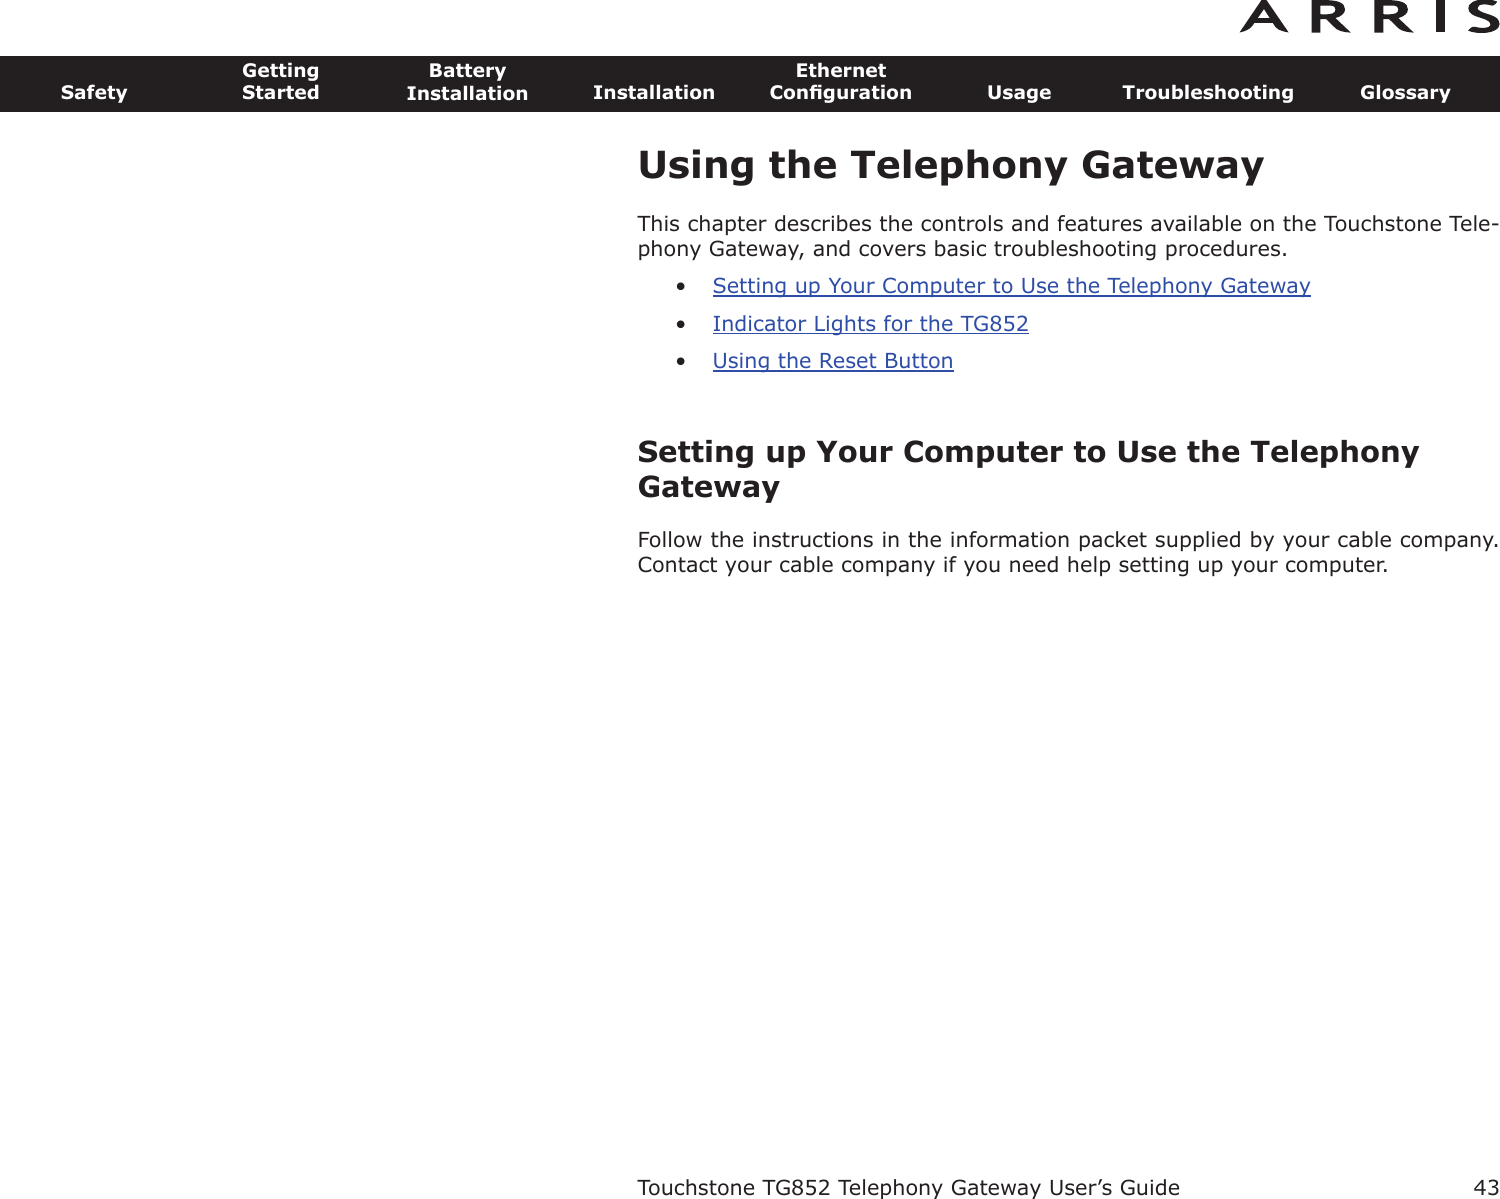 43SafetyGettingStartedBatteryInstallation InstallationEthernetConﬁguration Usage Troubleshooting GlossaryTouchstone TG852 Telephony Gateway User’s GuideUsing the Telephony GatewayThis chapter describes the controls and features available on the Touchstone Tele-phony Gateway, and covers basic troubleshooting procedures.•Setting up Your Computer to Use the Telephony Gateway•Indicator Lights for the TG852•Using the Reset ButtonSetting up Your Computer to Use the TelephonyGatewayFollow the instructions in the information packet supplied by your cable company.Contact your cable company if you need help setting up your computer.